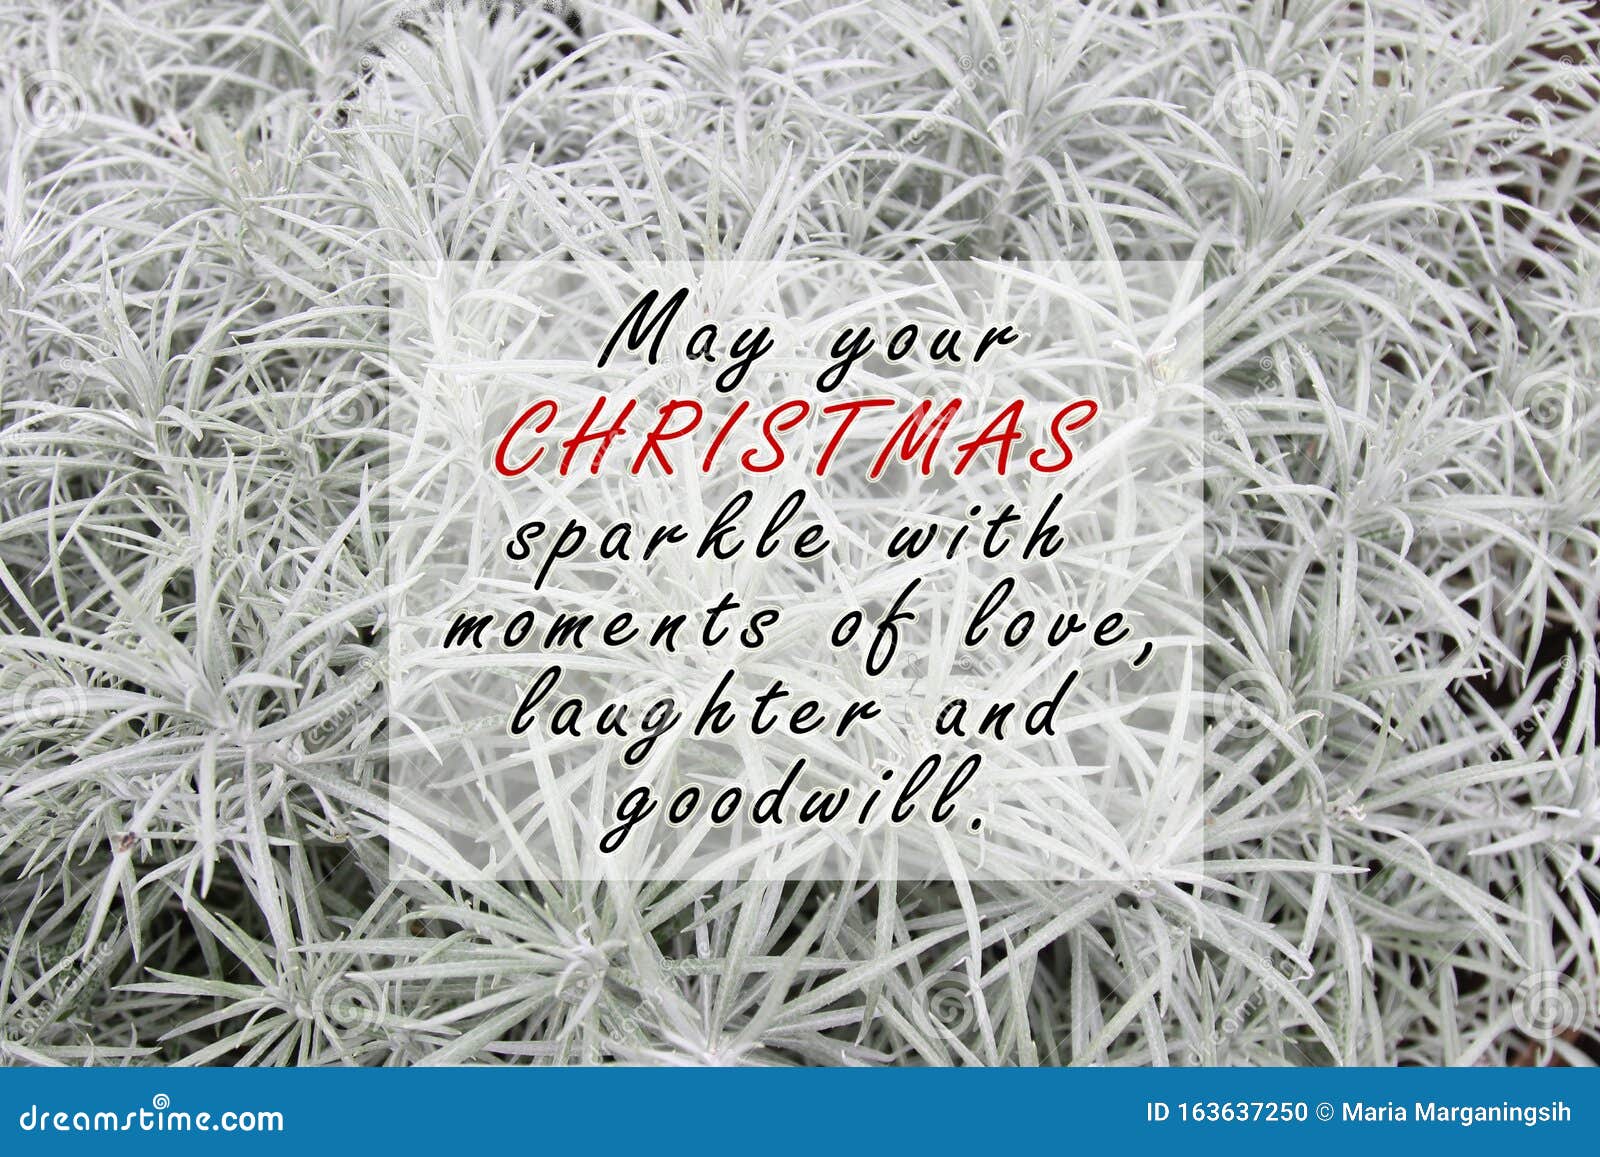 inspirational quote - may your christmas sparkle of love, laughter and goodwill.